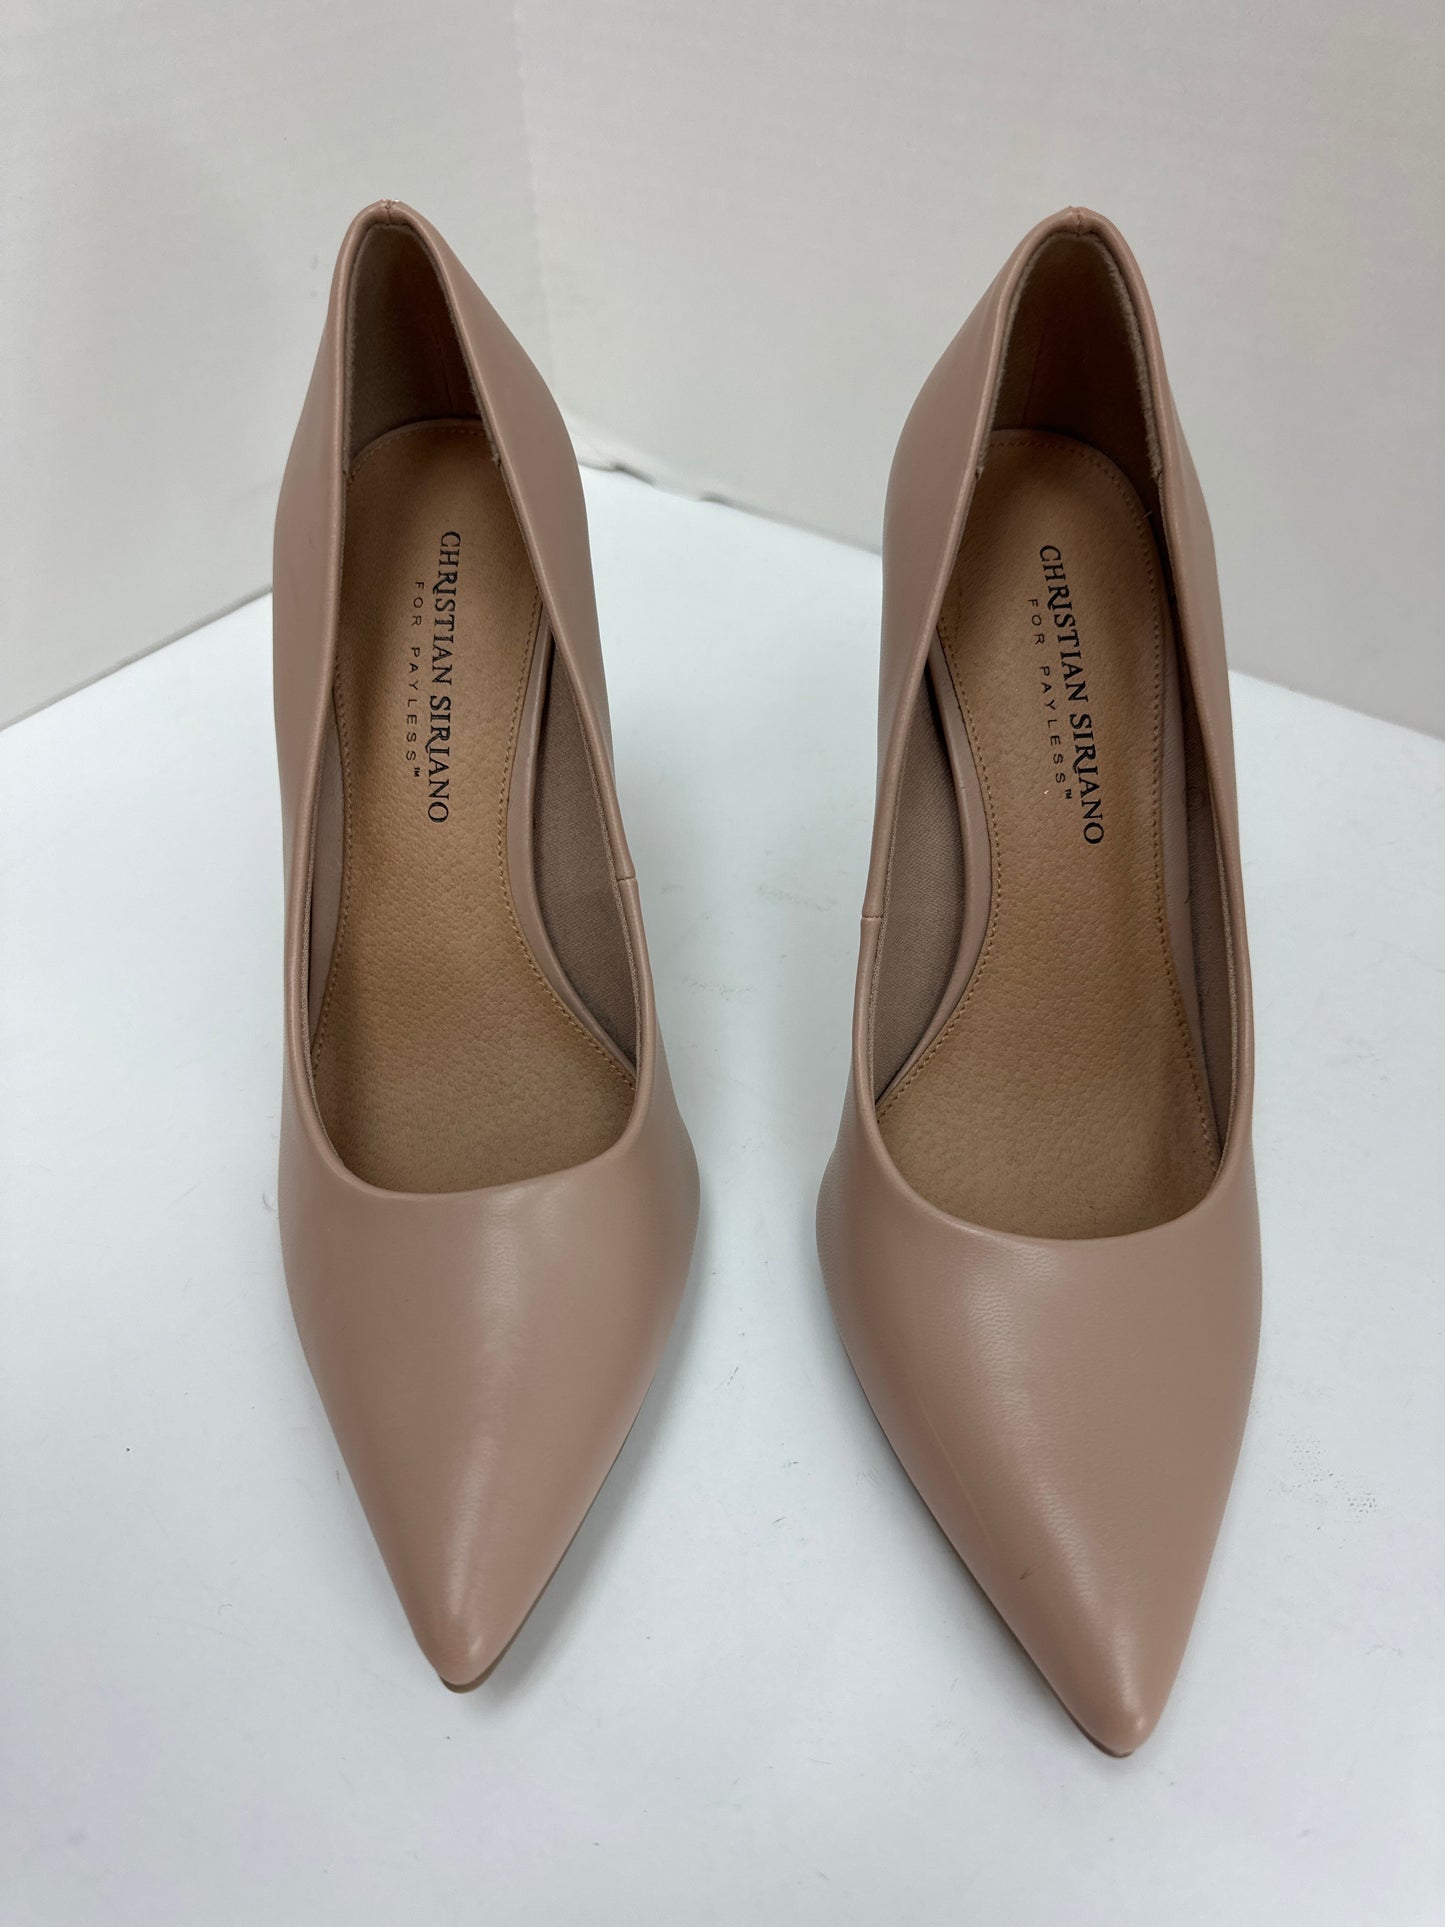 Shoes Heels Stiletto By Christian Siriano  Size: 8.5